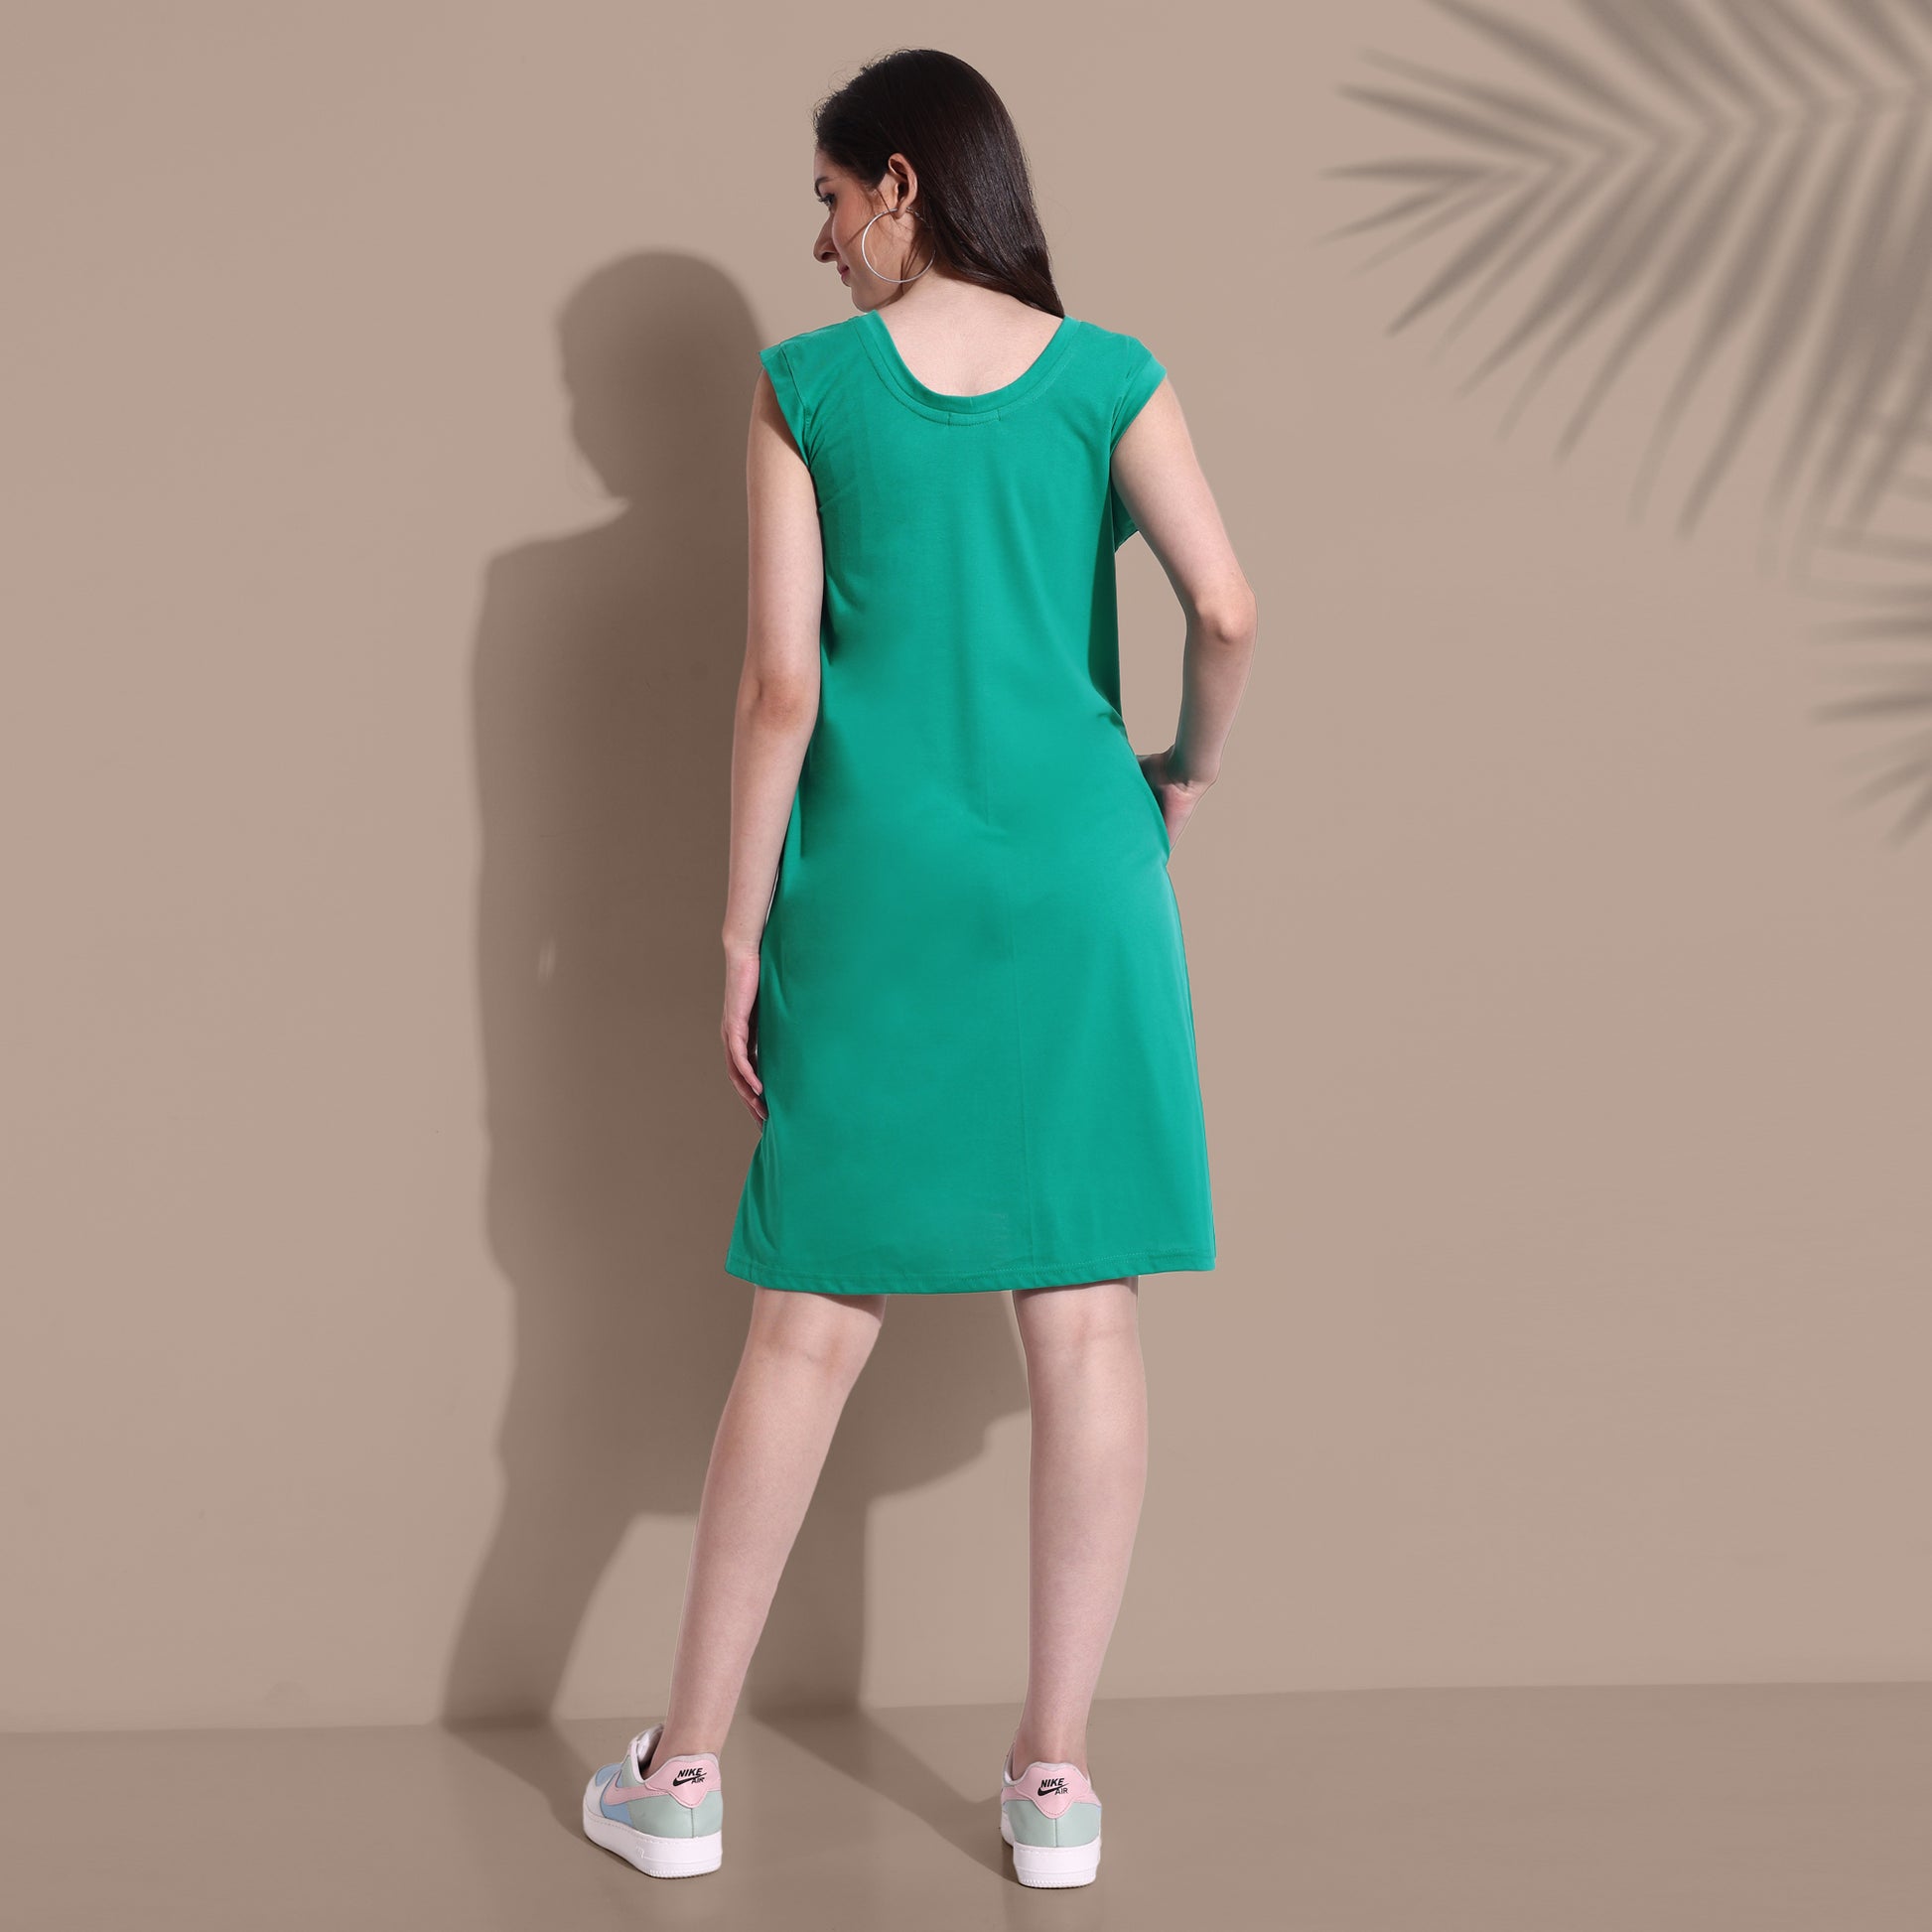 Breezy Summer Lounge Dress online in India at best prices